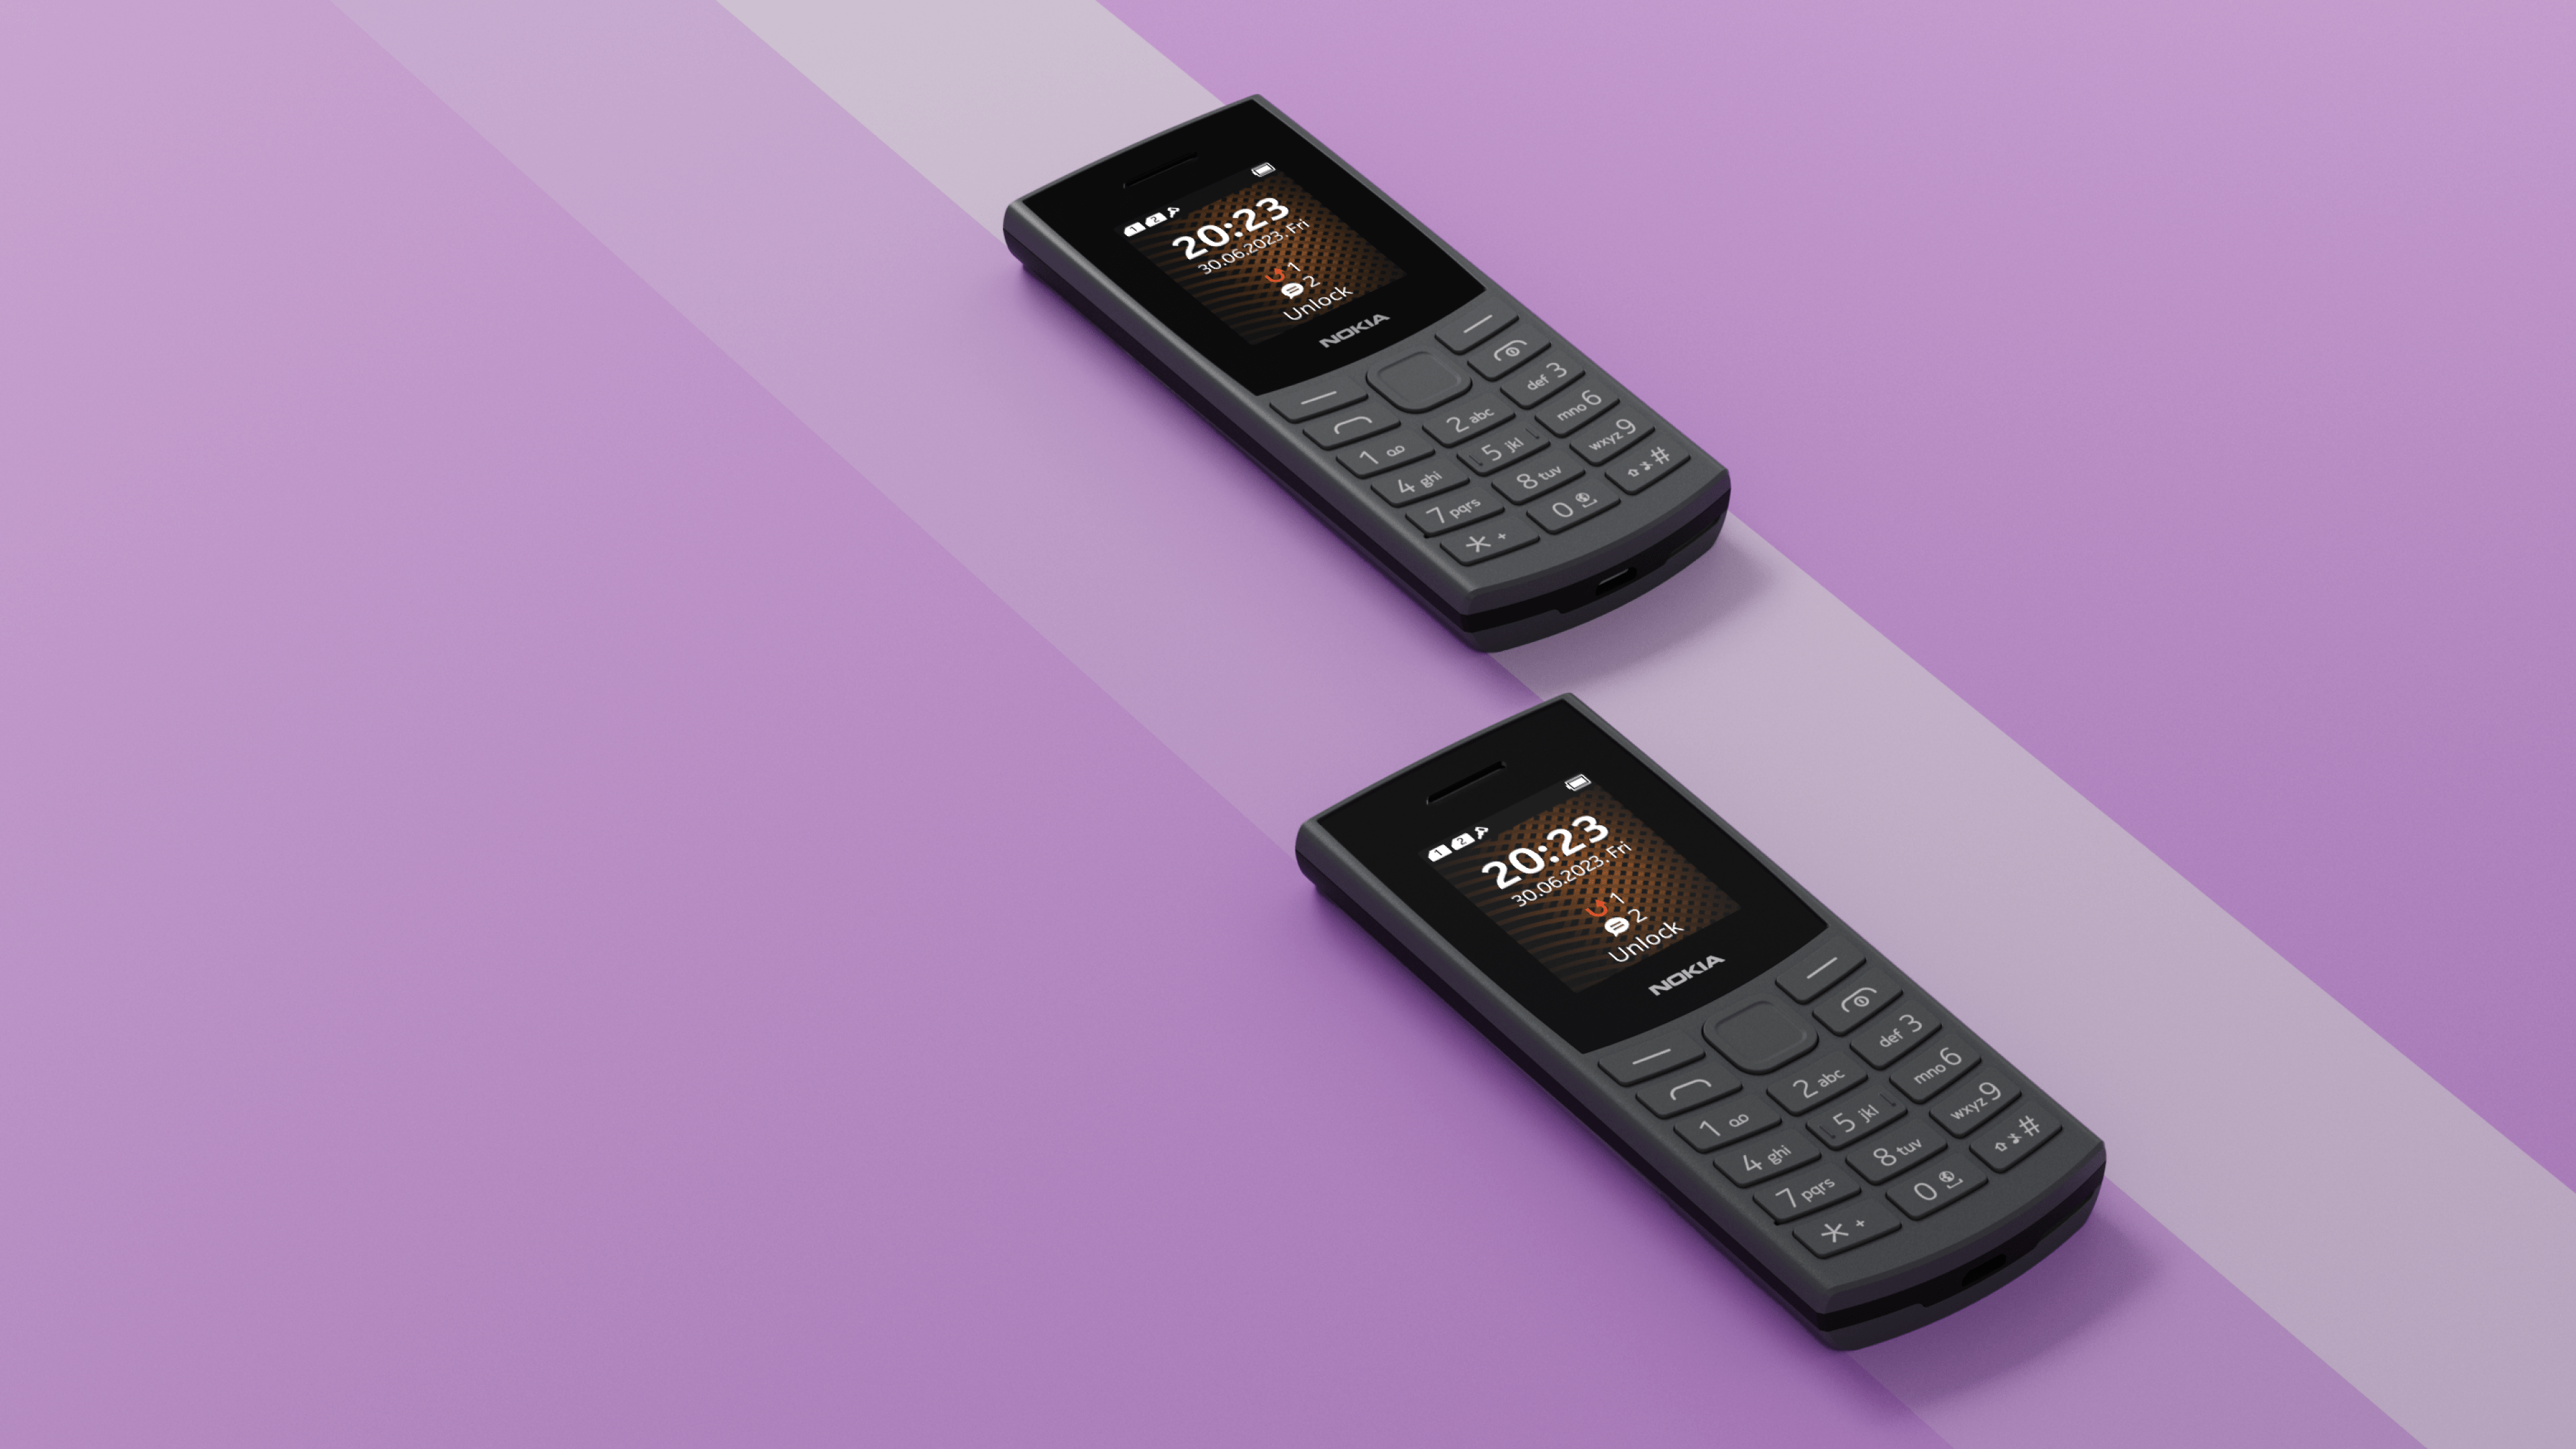 Nokia 105 feature 4G with phone internet